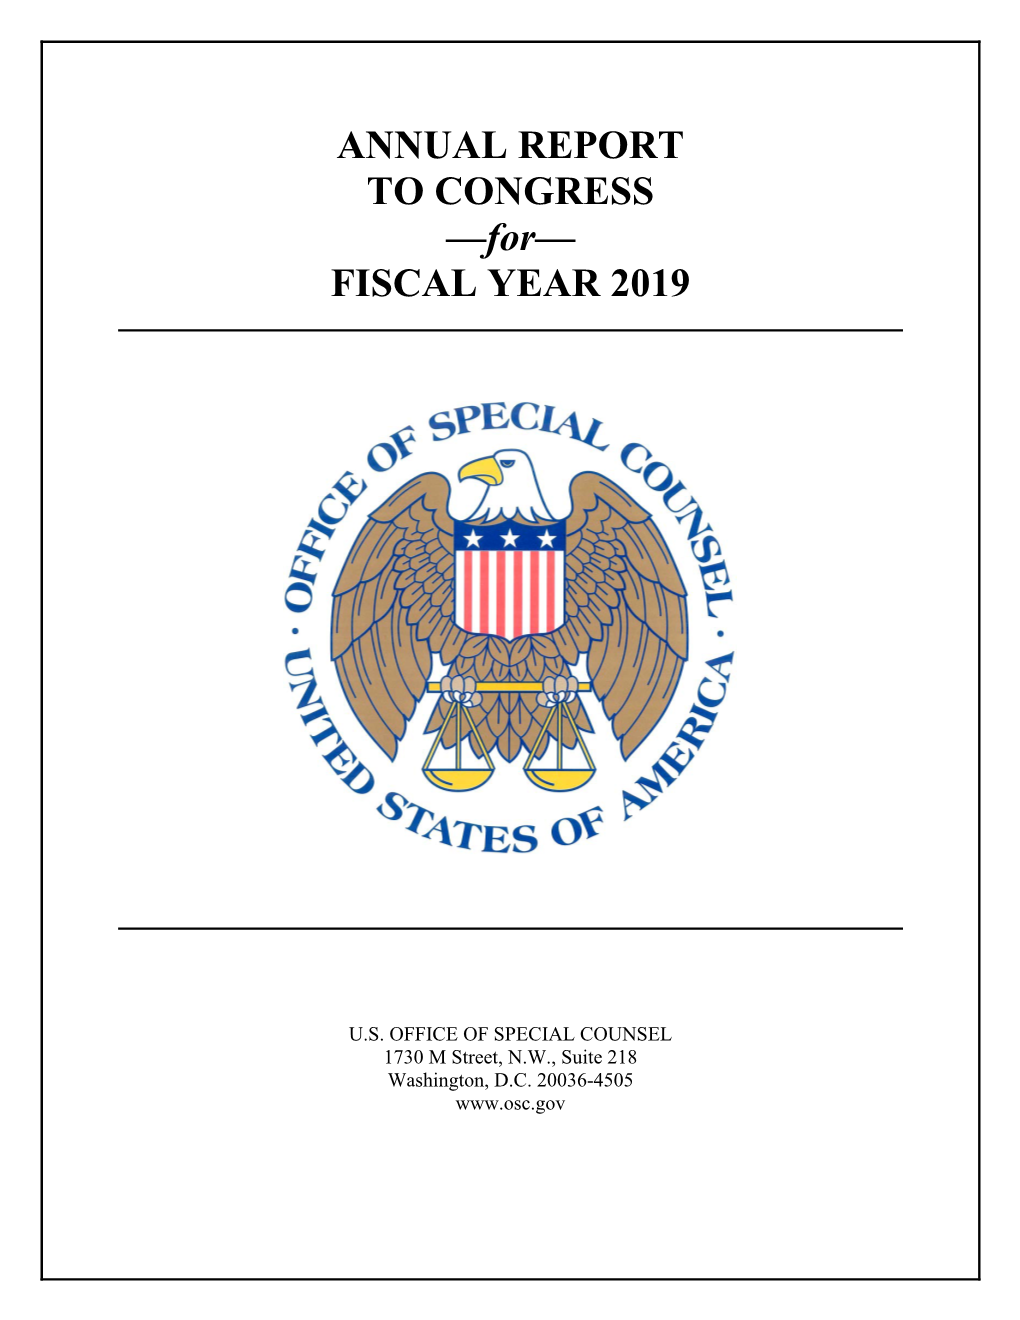 ANNUAL REPORT to CONGRESS —For— FISCAL YEAR 2019